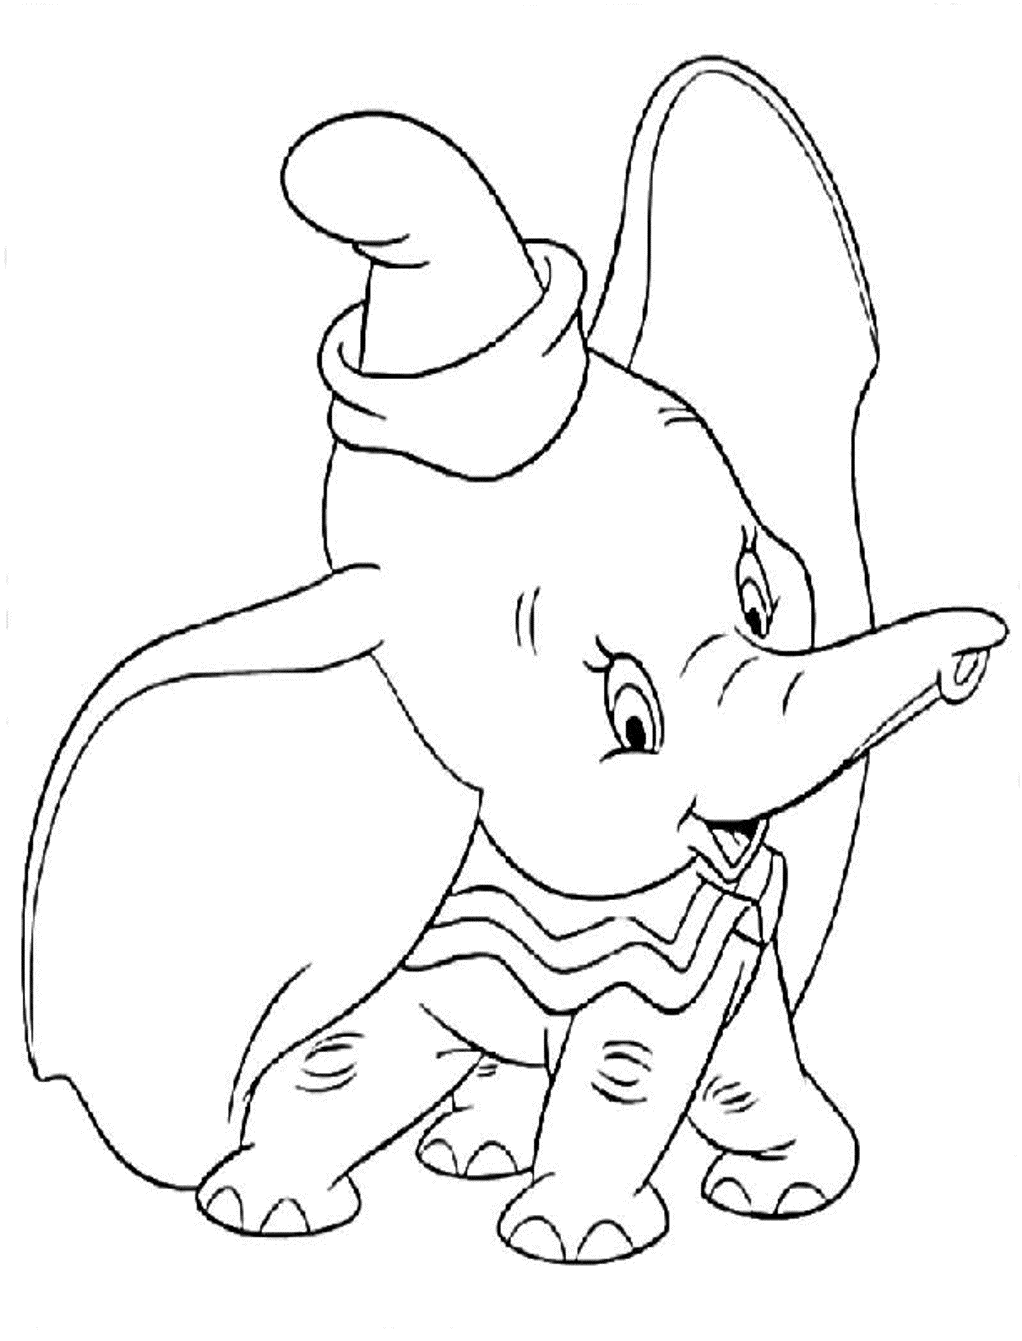 dumbo coloring pages | Only Coloring Pages